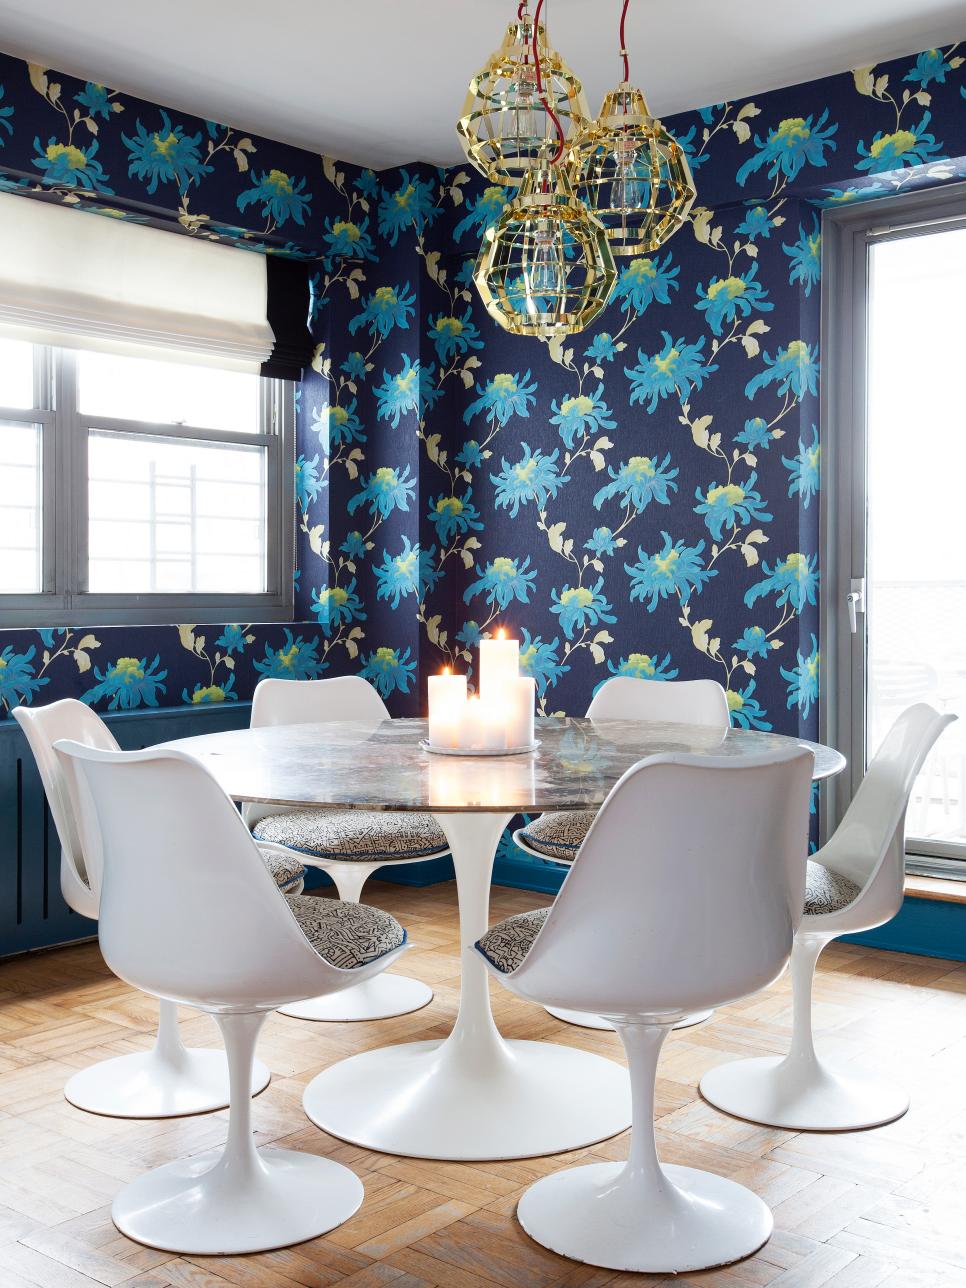 Dining Room With Blue Floral Wallpaper and Modern Pedestal Table